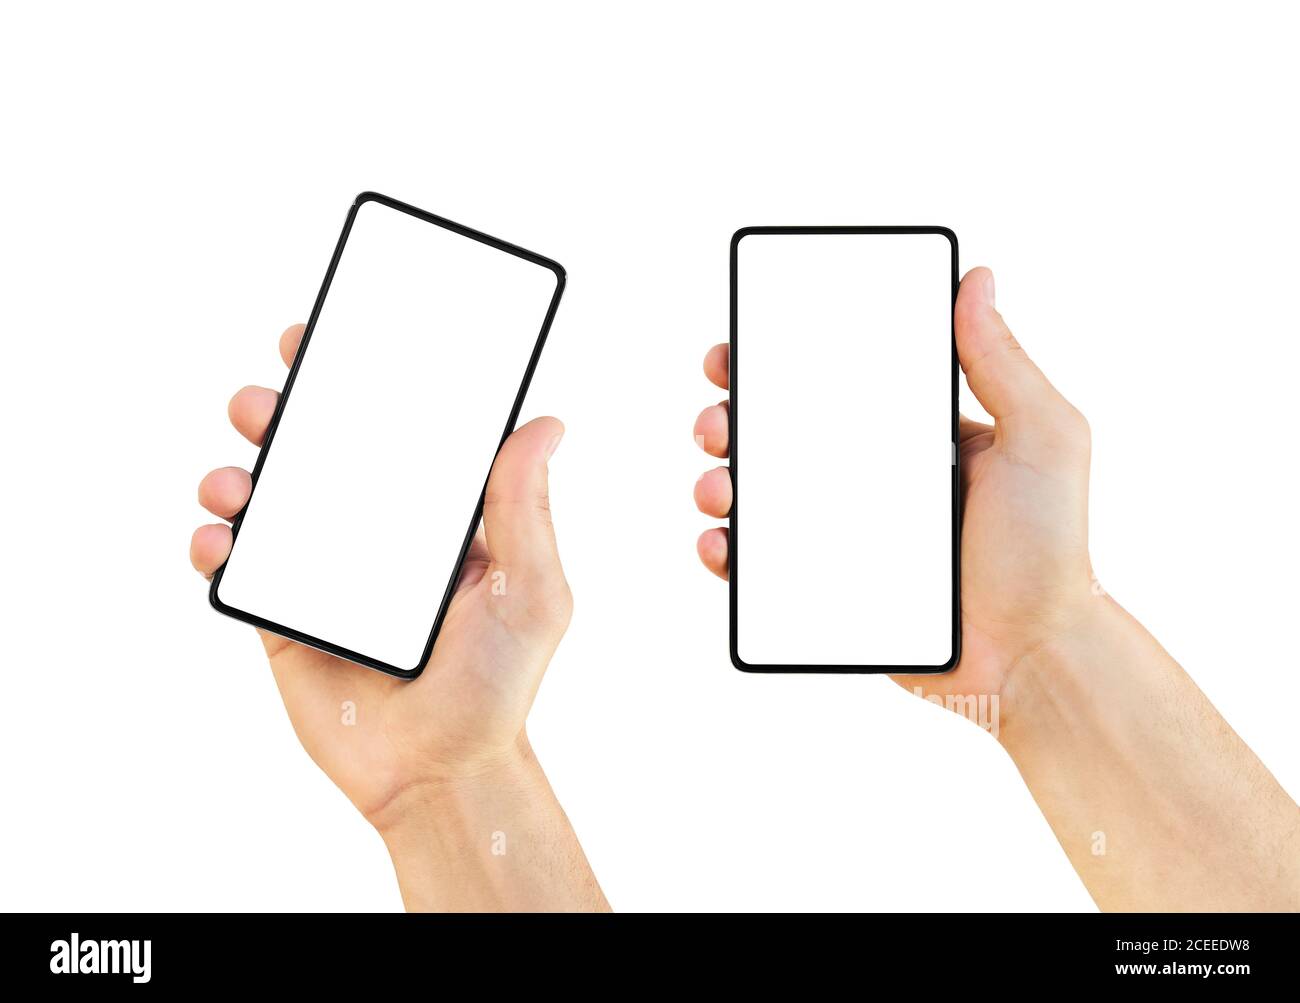 Set of man's hands holding modern smartphone isolated on white background. Close-up hand touching mobile smart phone. Stock Photo